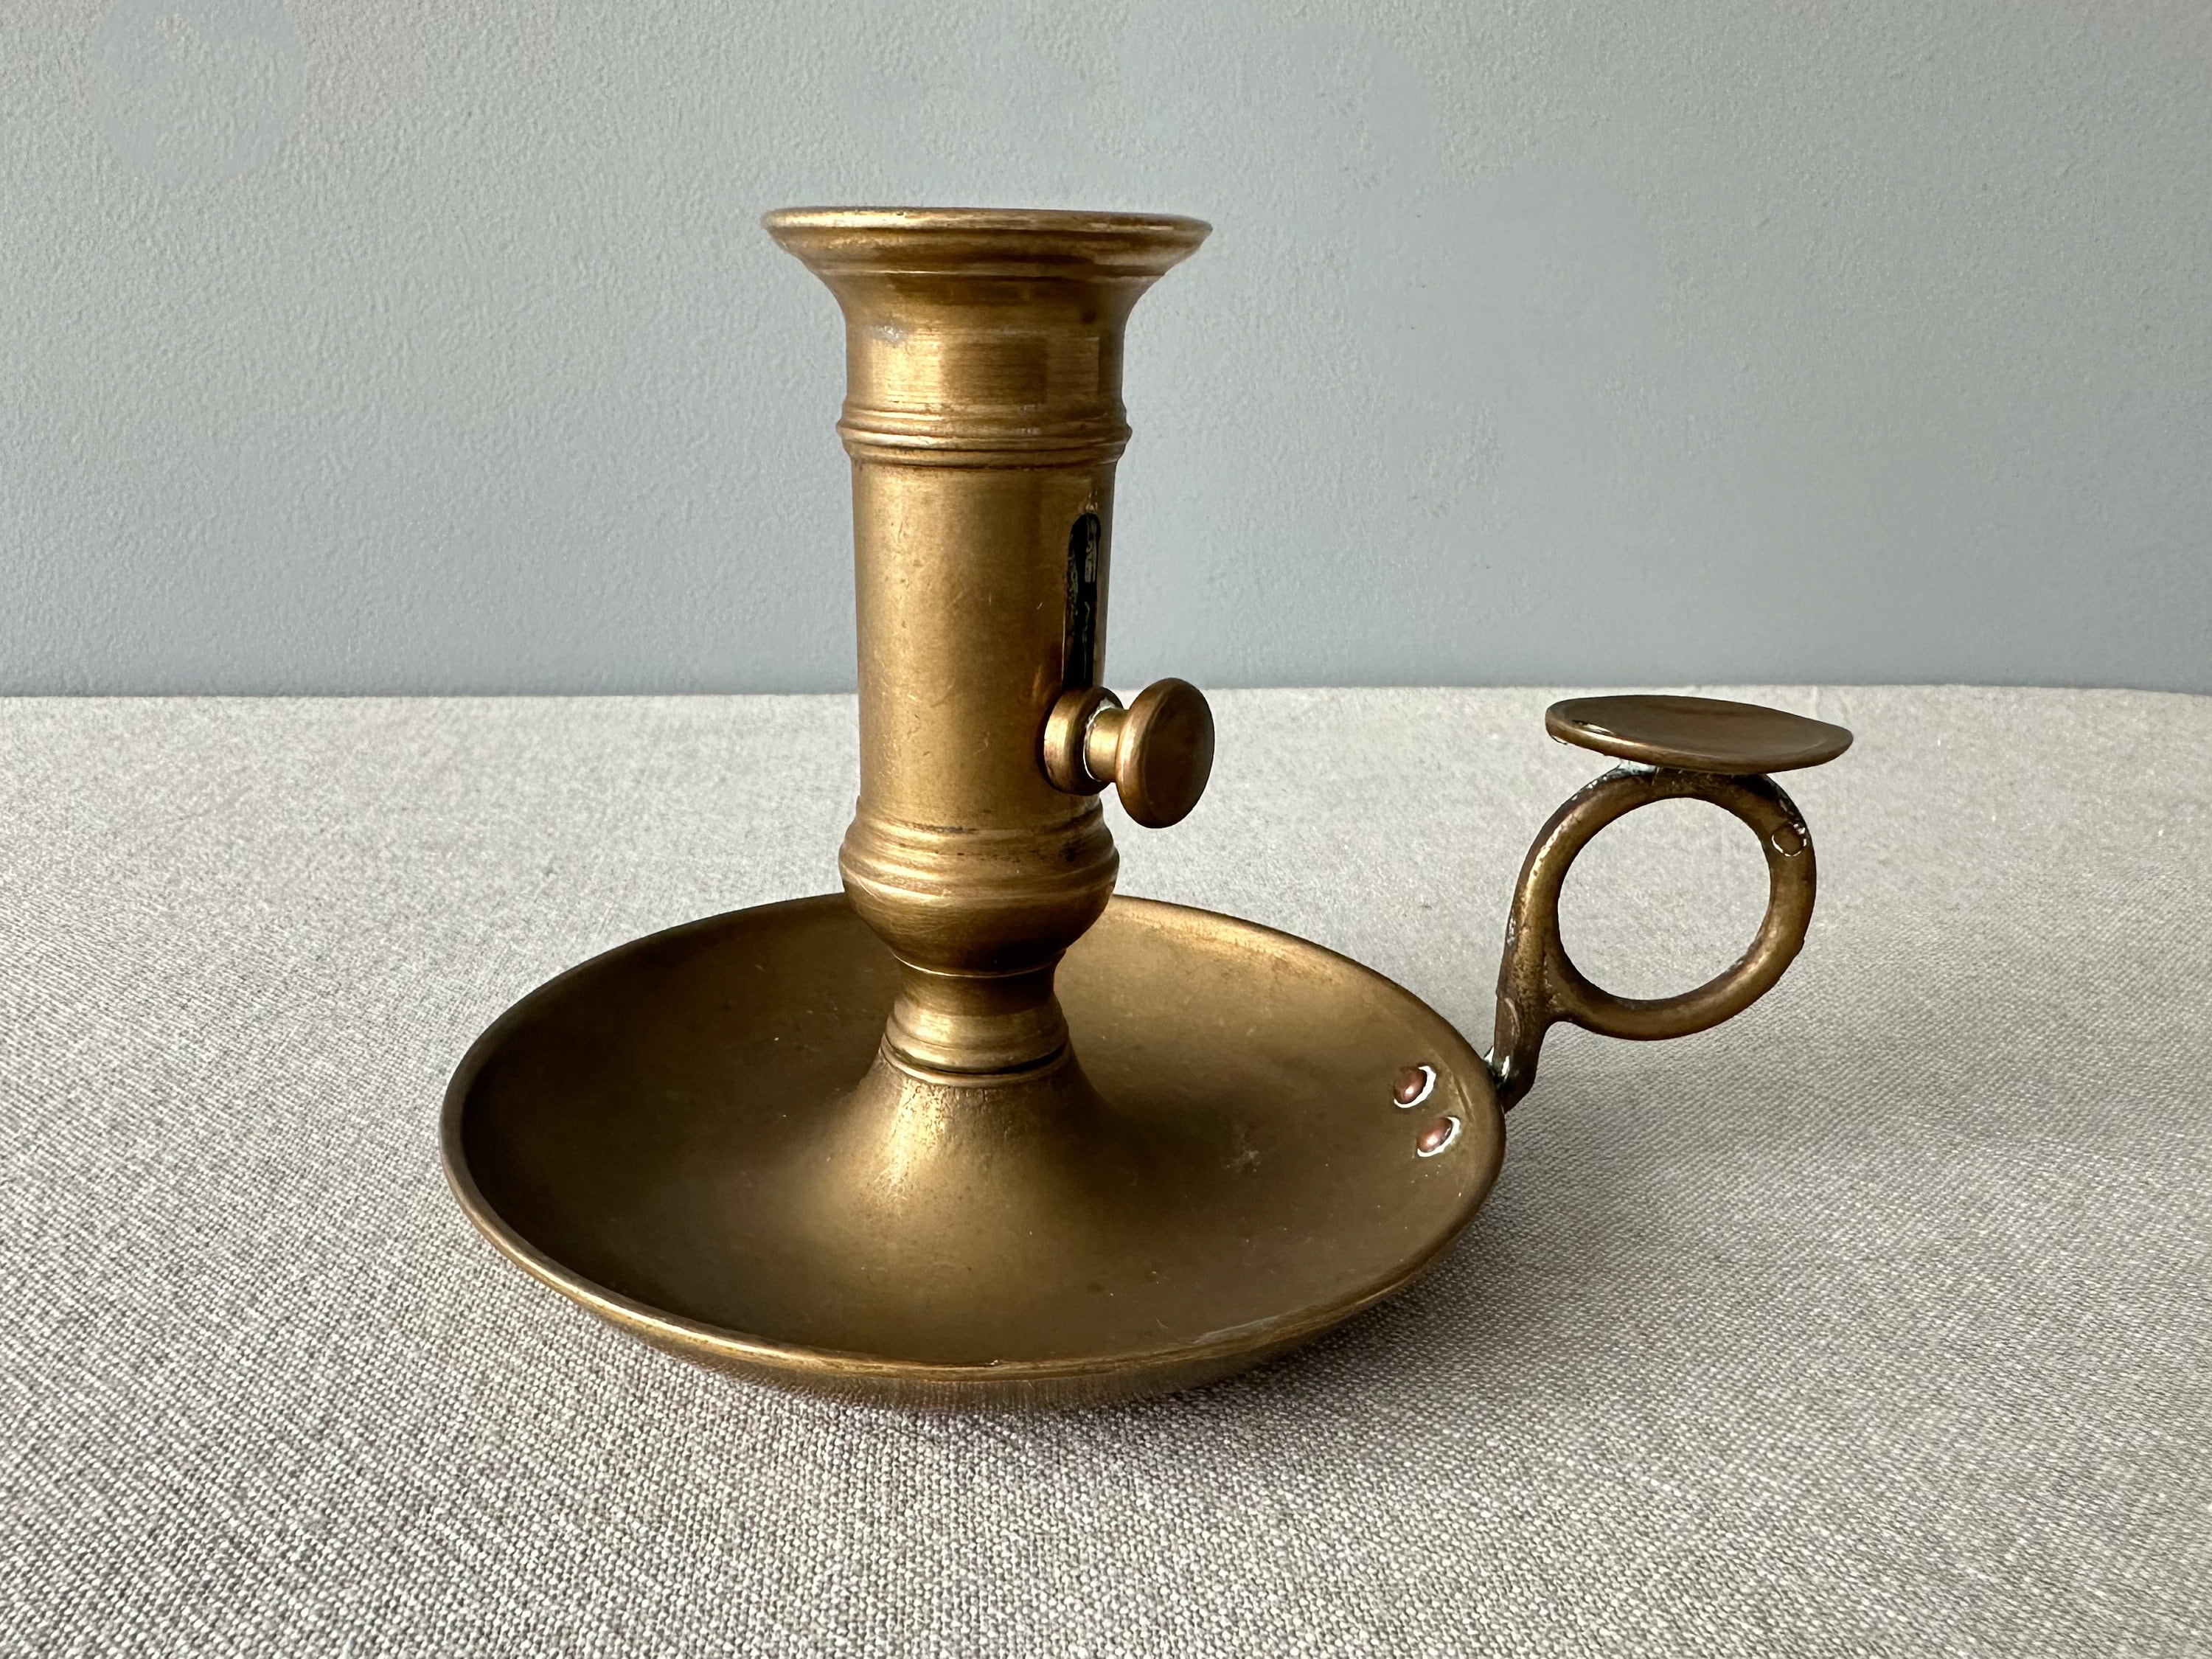 Vintage Brass Candle Holder With Push-up Mechanism, Chamberstick